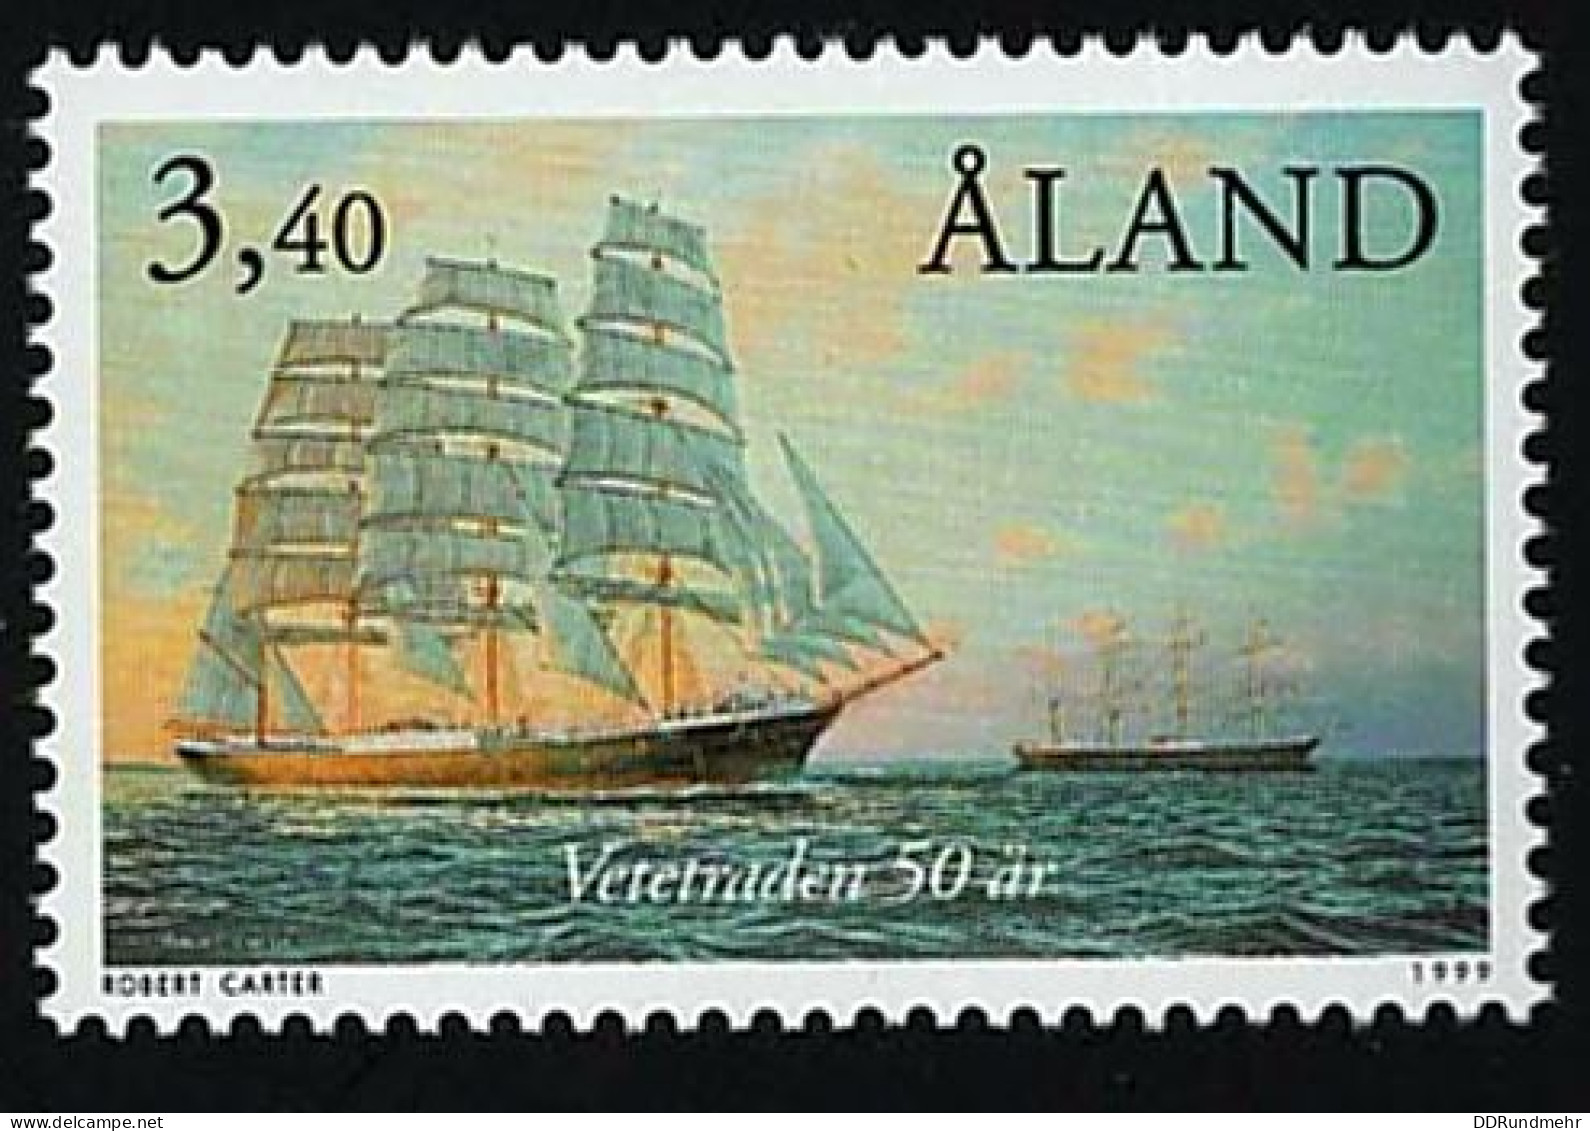 1999 Sailships 1999 Sailships  Michel AX 155 Stamp Number AX 156 Yvert Et Tellier AX 155 Stanley Gibbons AX 151 A Xx MNH - Aland